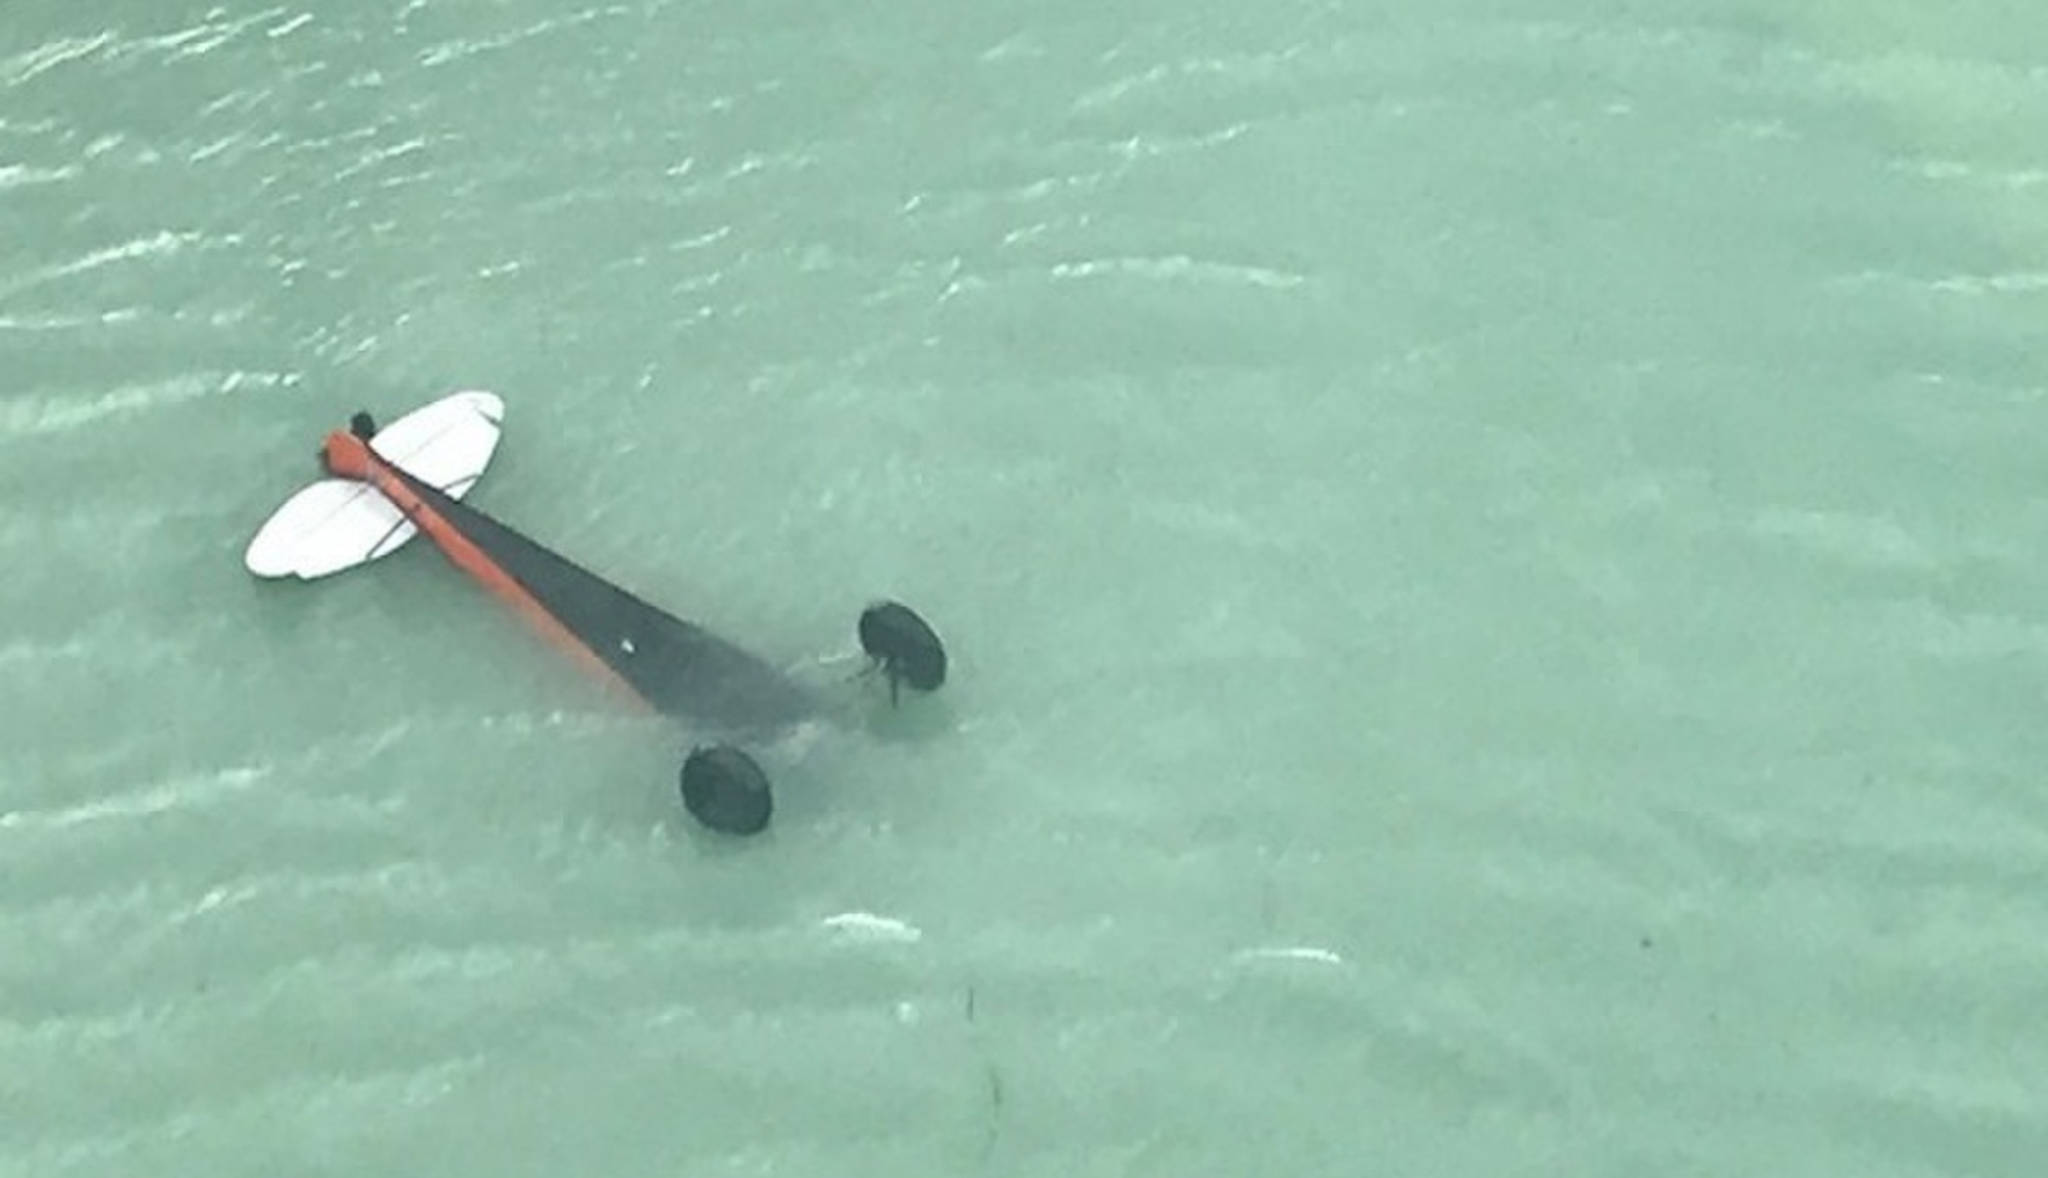 A Coast Guard Air Station Sitka MH-60 Jayhawk helicopter aircew locates a downed aircraft inverted in Crillon Lake, in Glacier Bay National Park, Alaska, July 18, 2018. The National Park Service requested Coast Guard assistance in locating the pilot of the aircraft, who was found and hoisted from a Crillon Lake shore with minor injuries. (U.S. Coast Guard | Courtesy Photo)